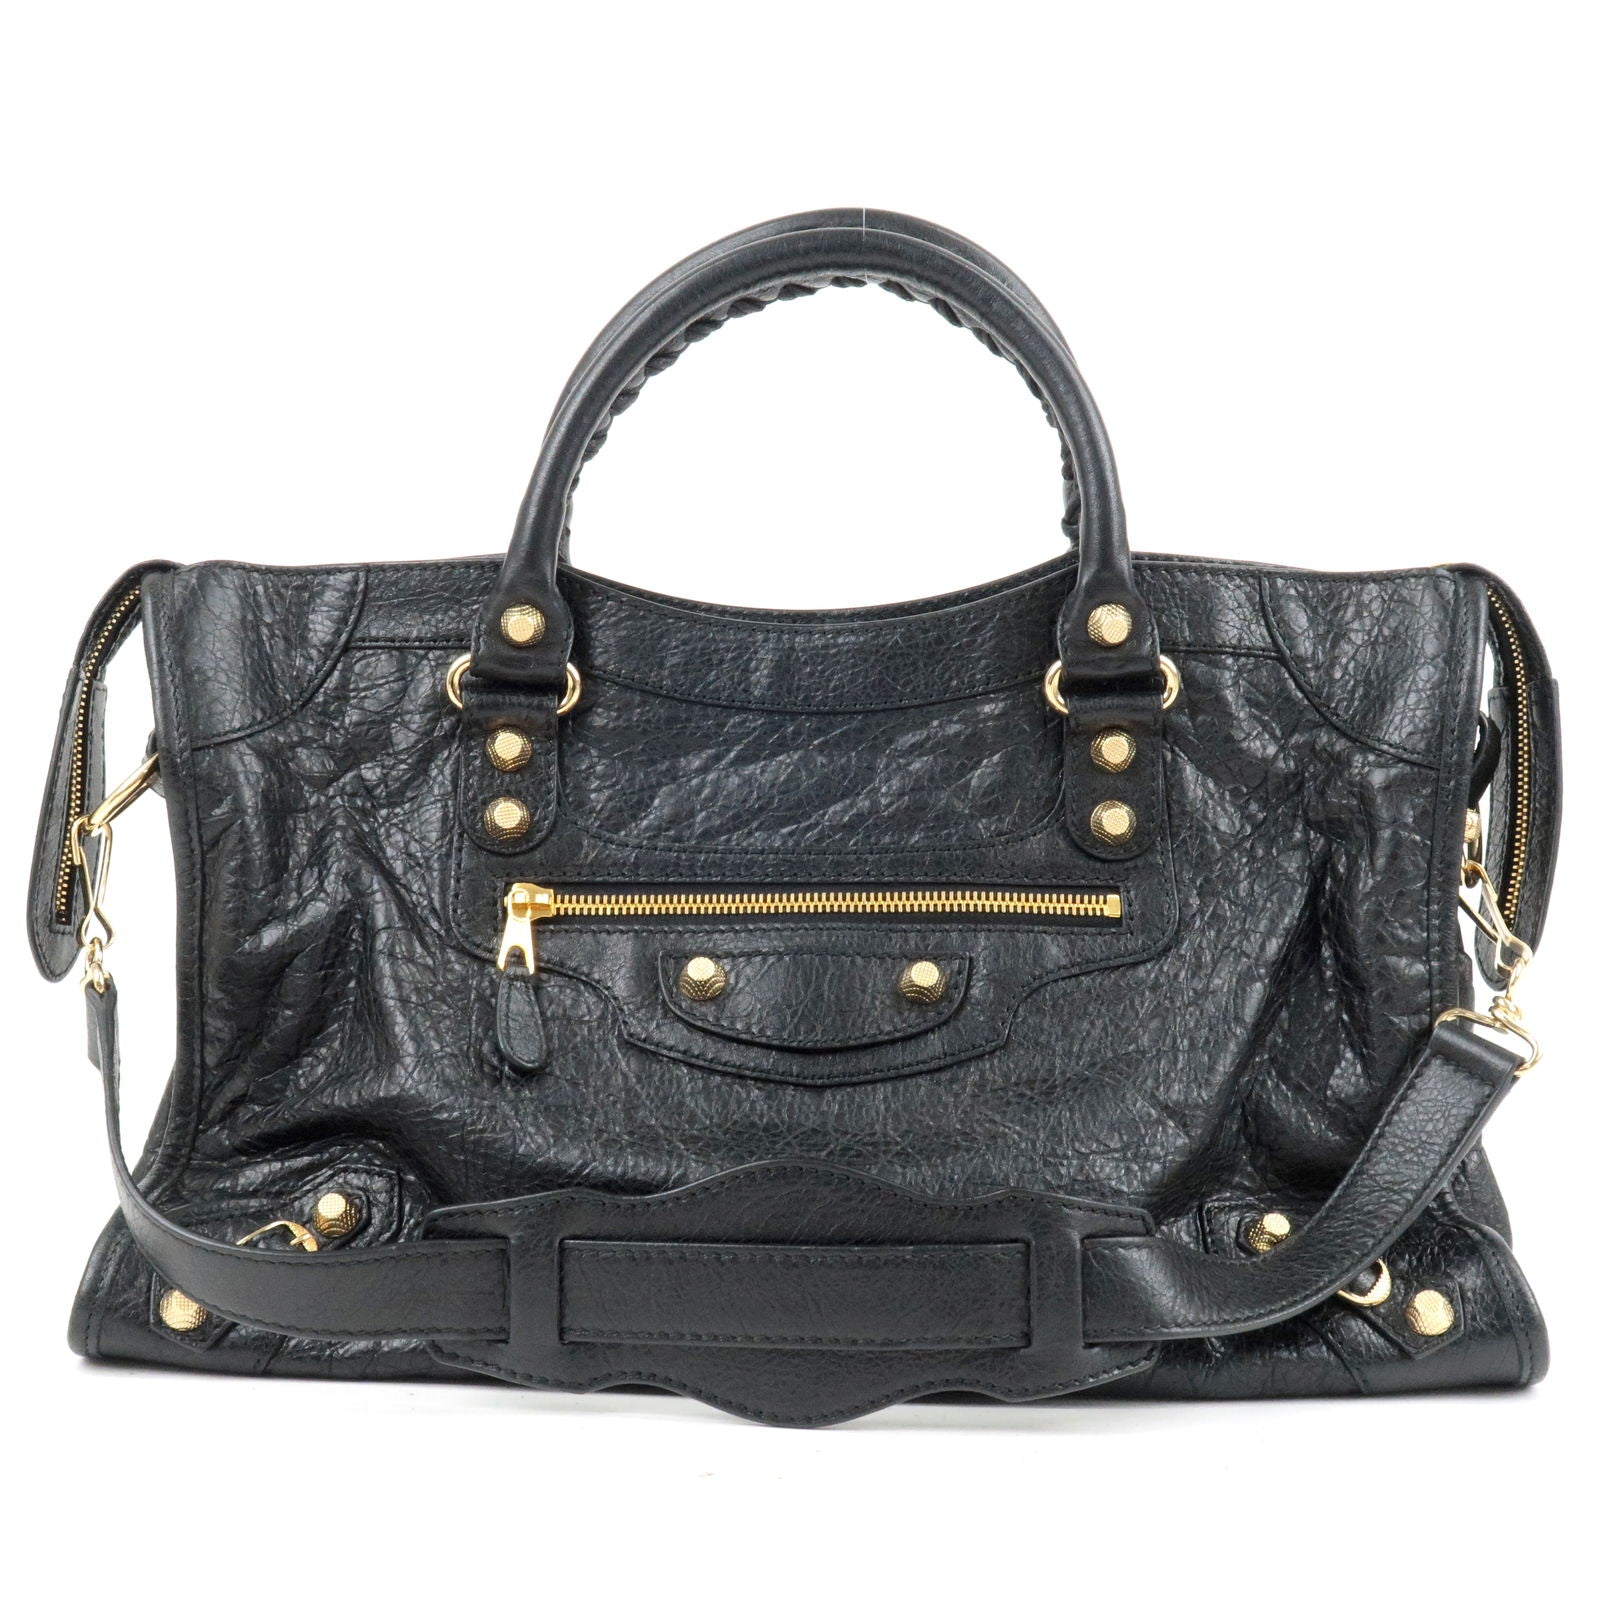 - Hand - Giant - Leather - 281770 – dct - quilted spike-stud lambskin bag - Bag - Bag - City - ep_vintage luxury - The - Black